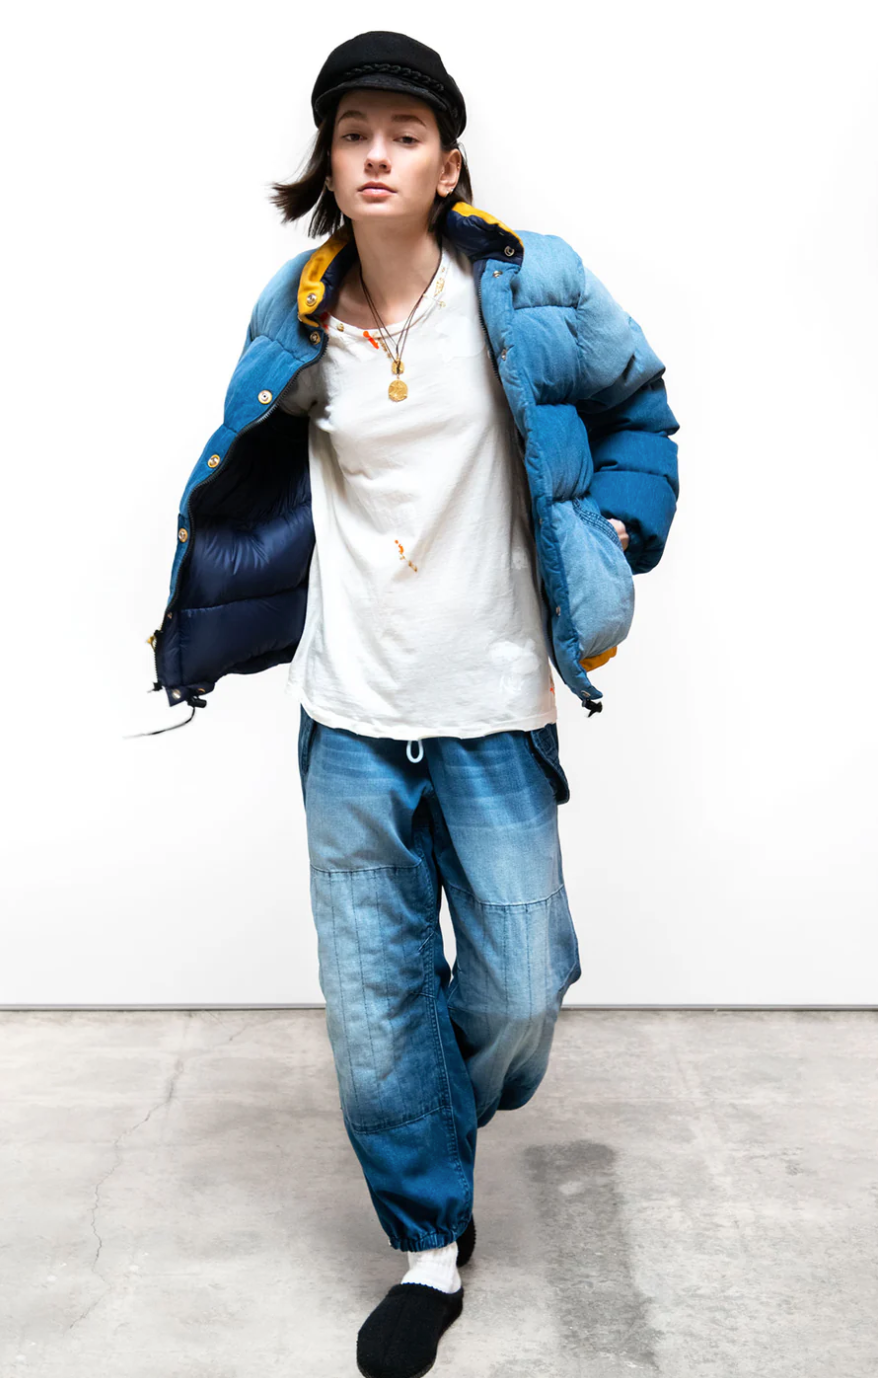 A young person in stylish, layered streetwear: an oversized blue puffer jacket over a white t-shirt, FLAP/SNAP INDIGO pants from Free City (sparrow, LLC), a black beanie, and beige bucket hat, posing against a white background.